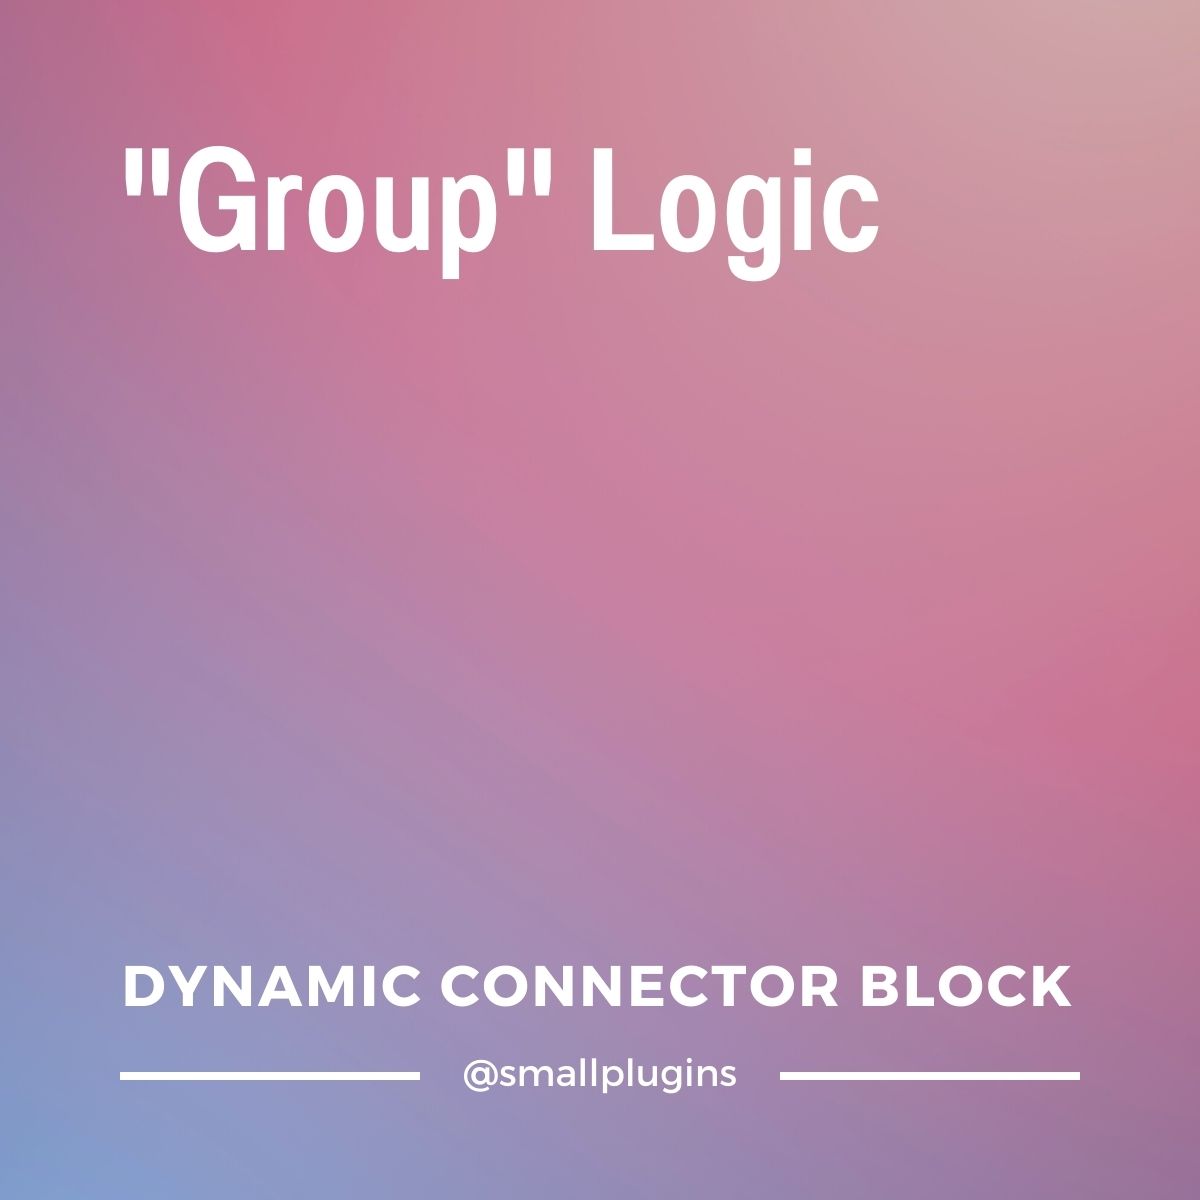 How to assign logic to your Dynamic Connector block through “Groups”